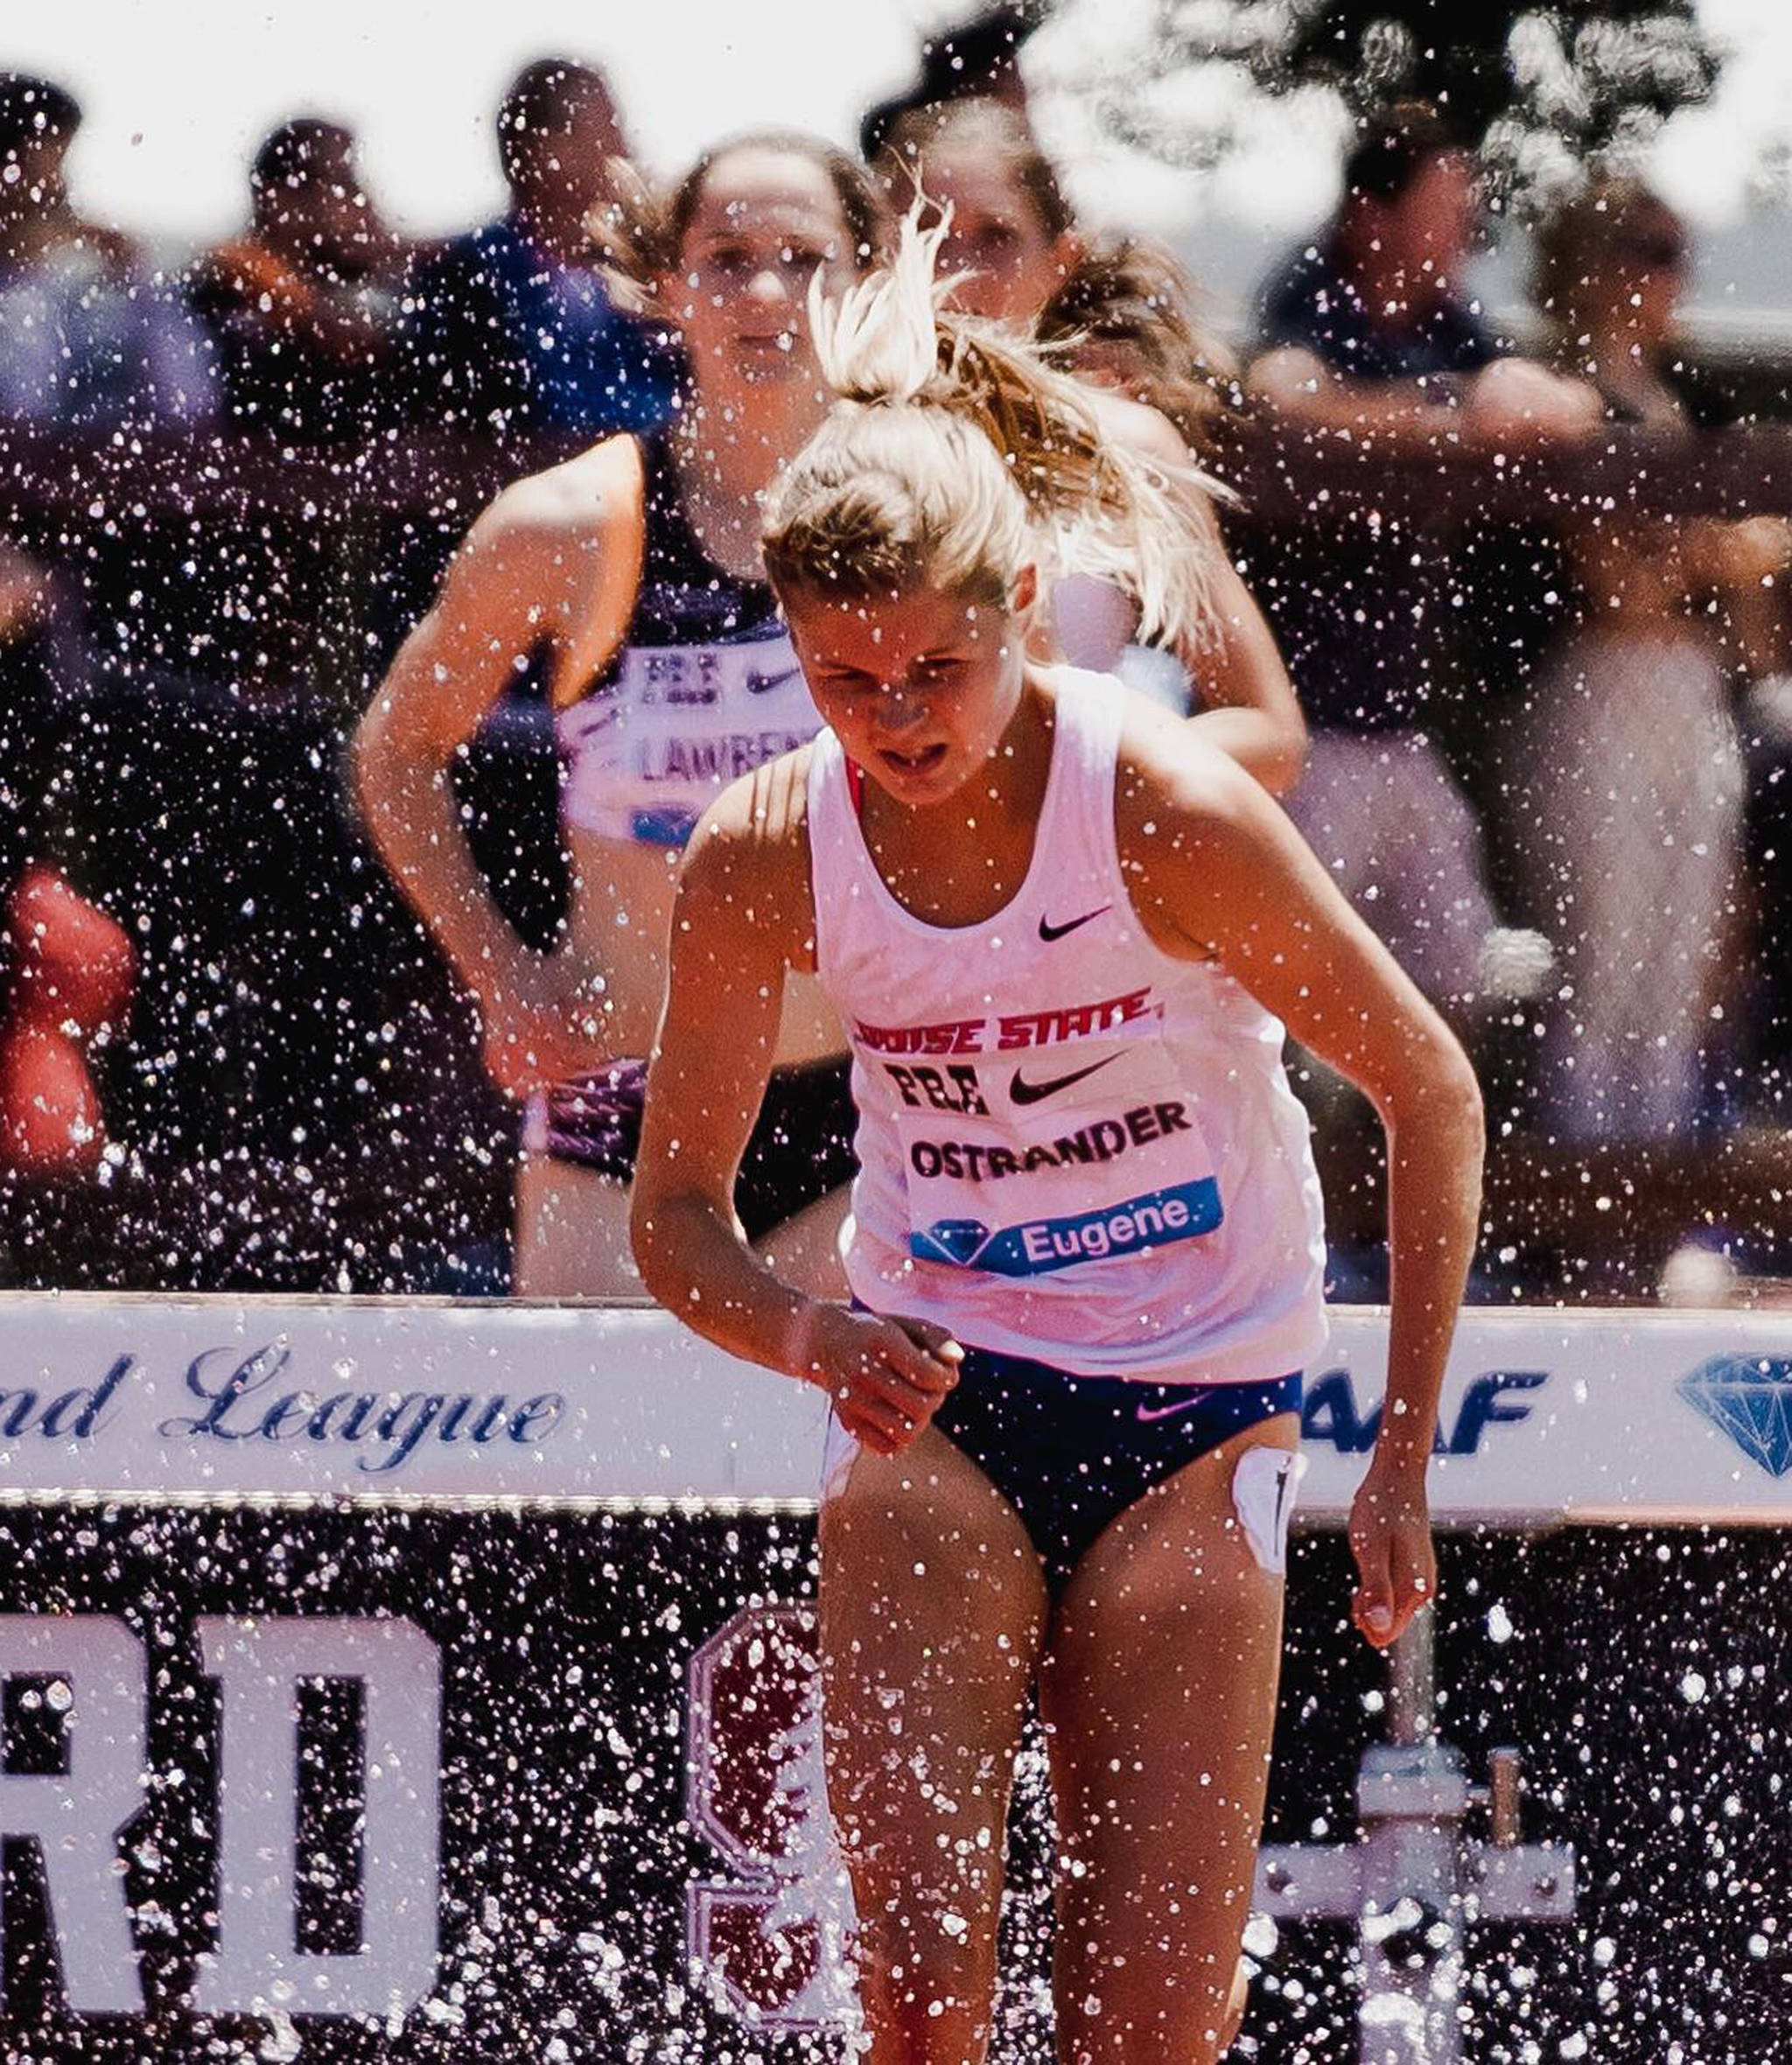 Boise State’s Allie Ostrander competes in the women’s 3,000-meter steeplechase final June 30 at the Prefontaine Classic at Stanford University in California. (Photo taken by Cortney White)